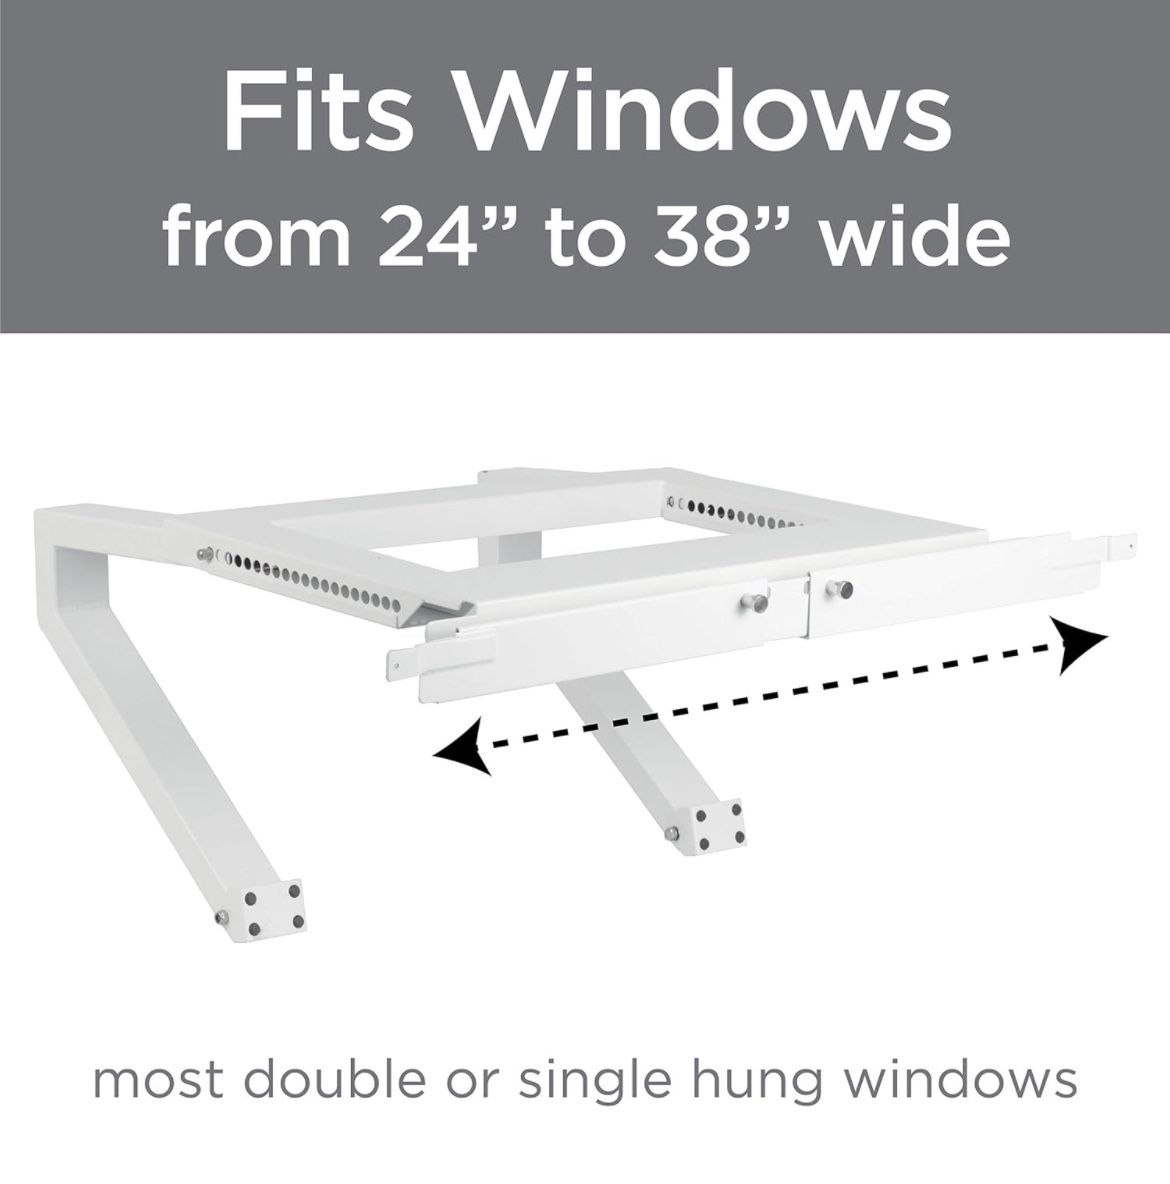 Universal Heavy Duty Window Air Conditioner AC Support Bracket -Holds Up to 225 lbs